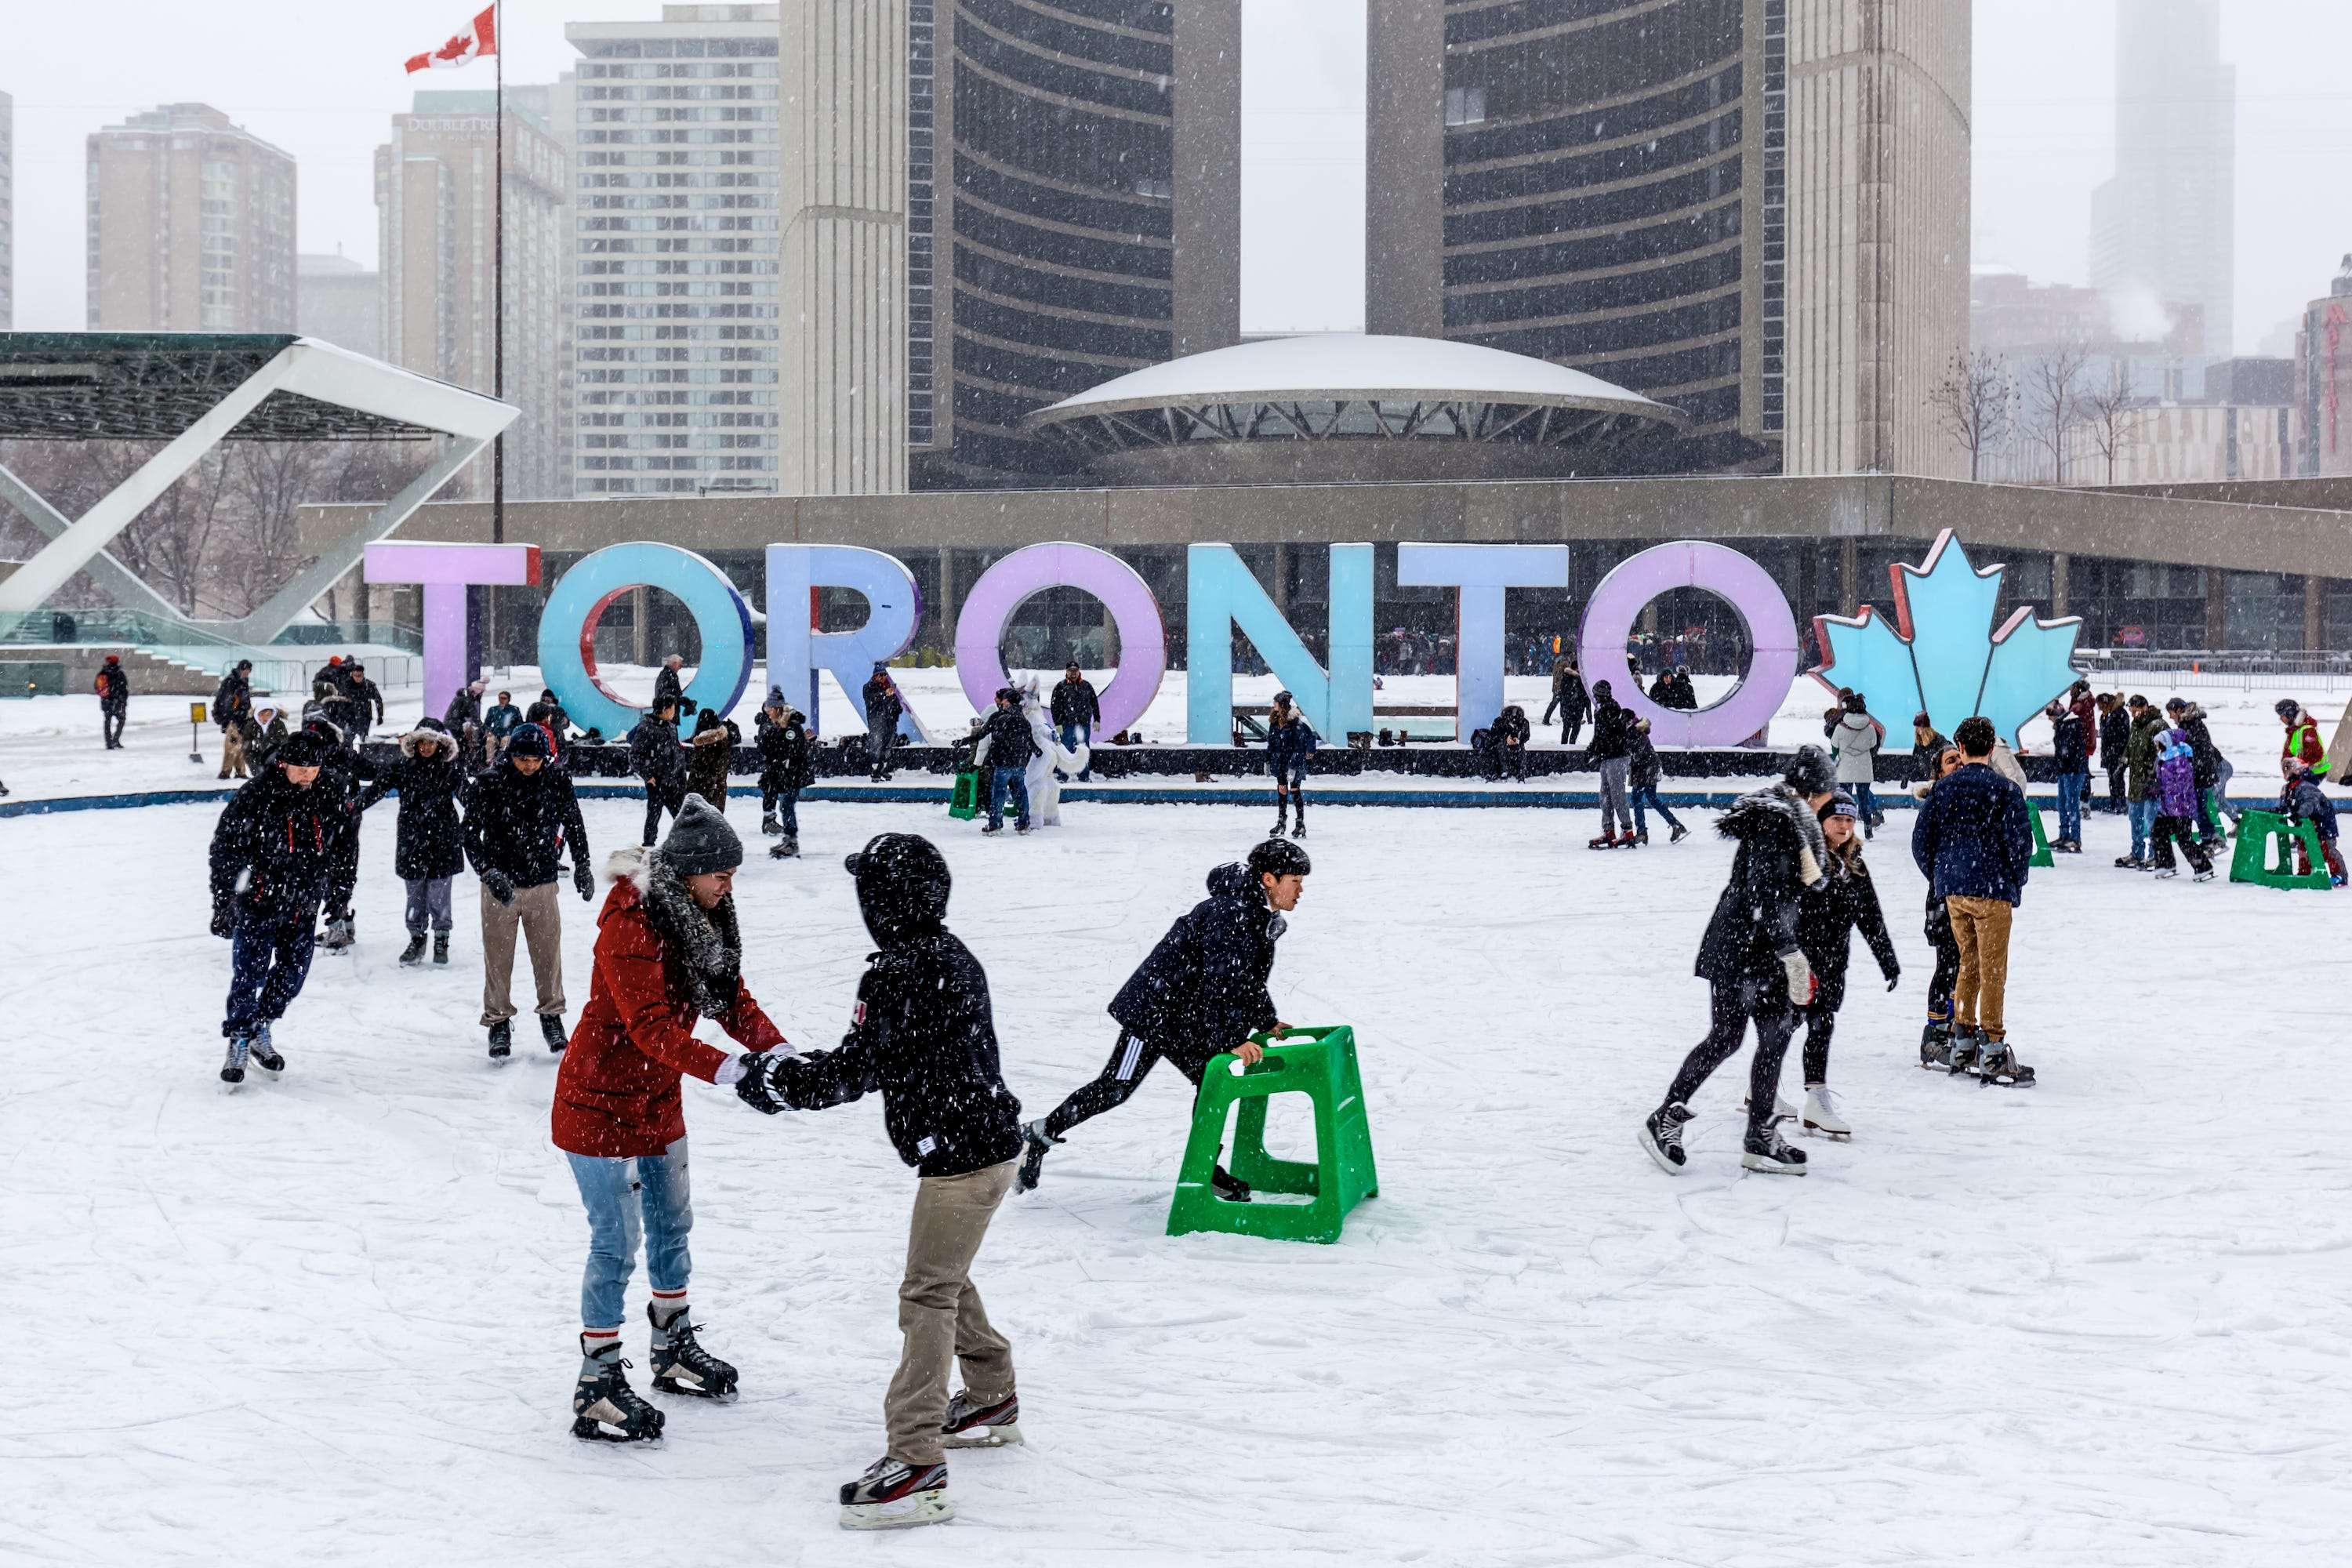 Toronto is emerging as a tech superpower as immigrants choose Canada over the US